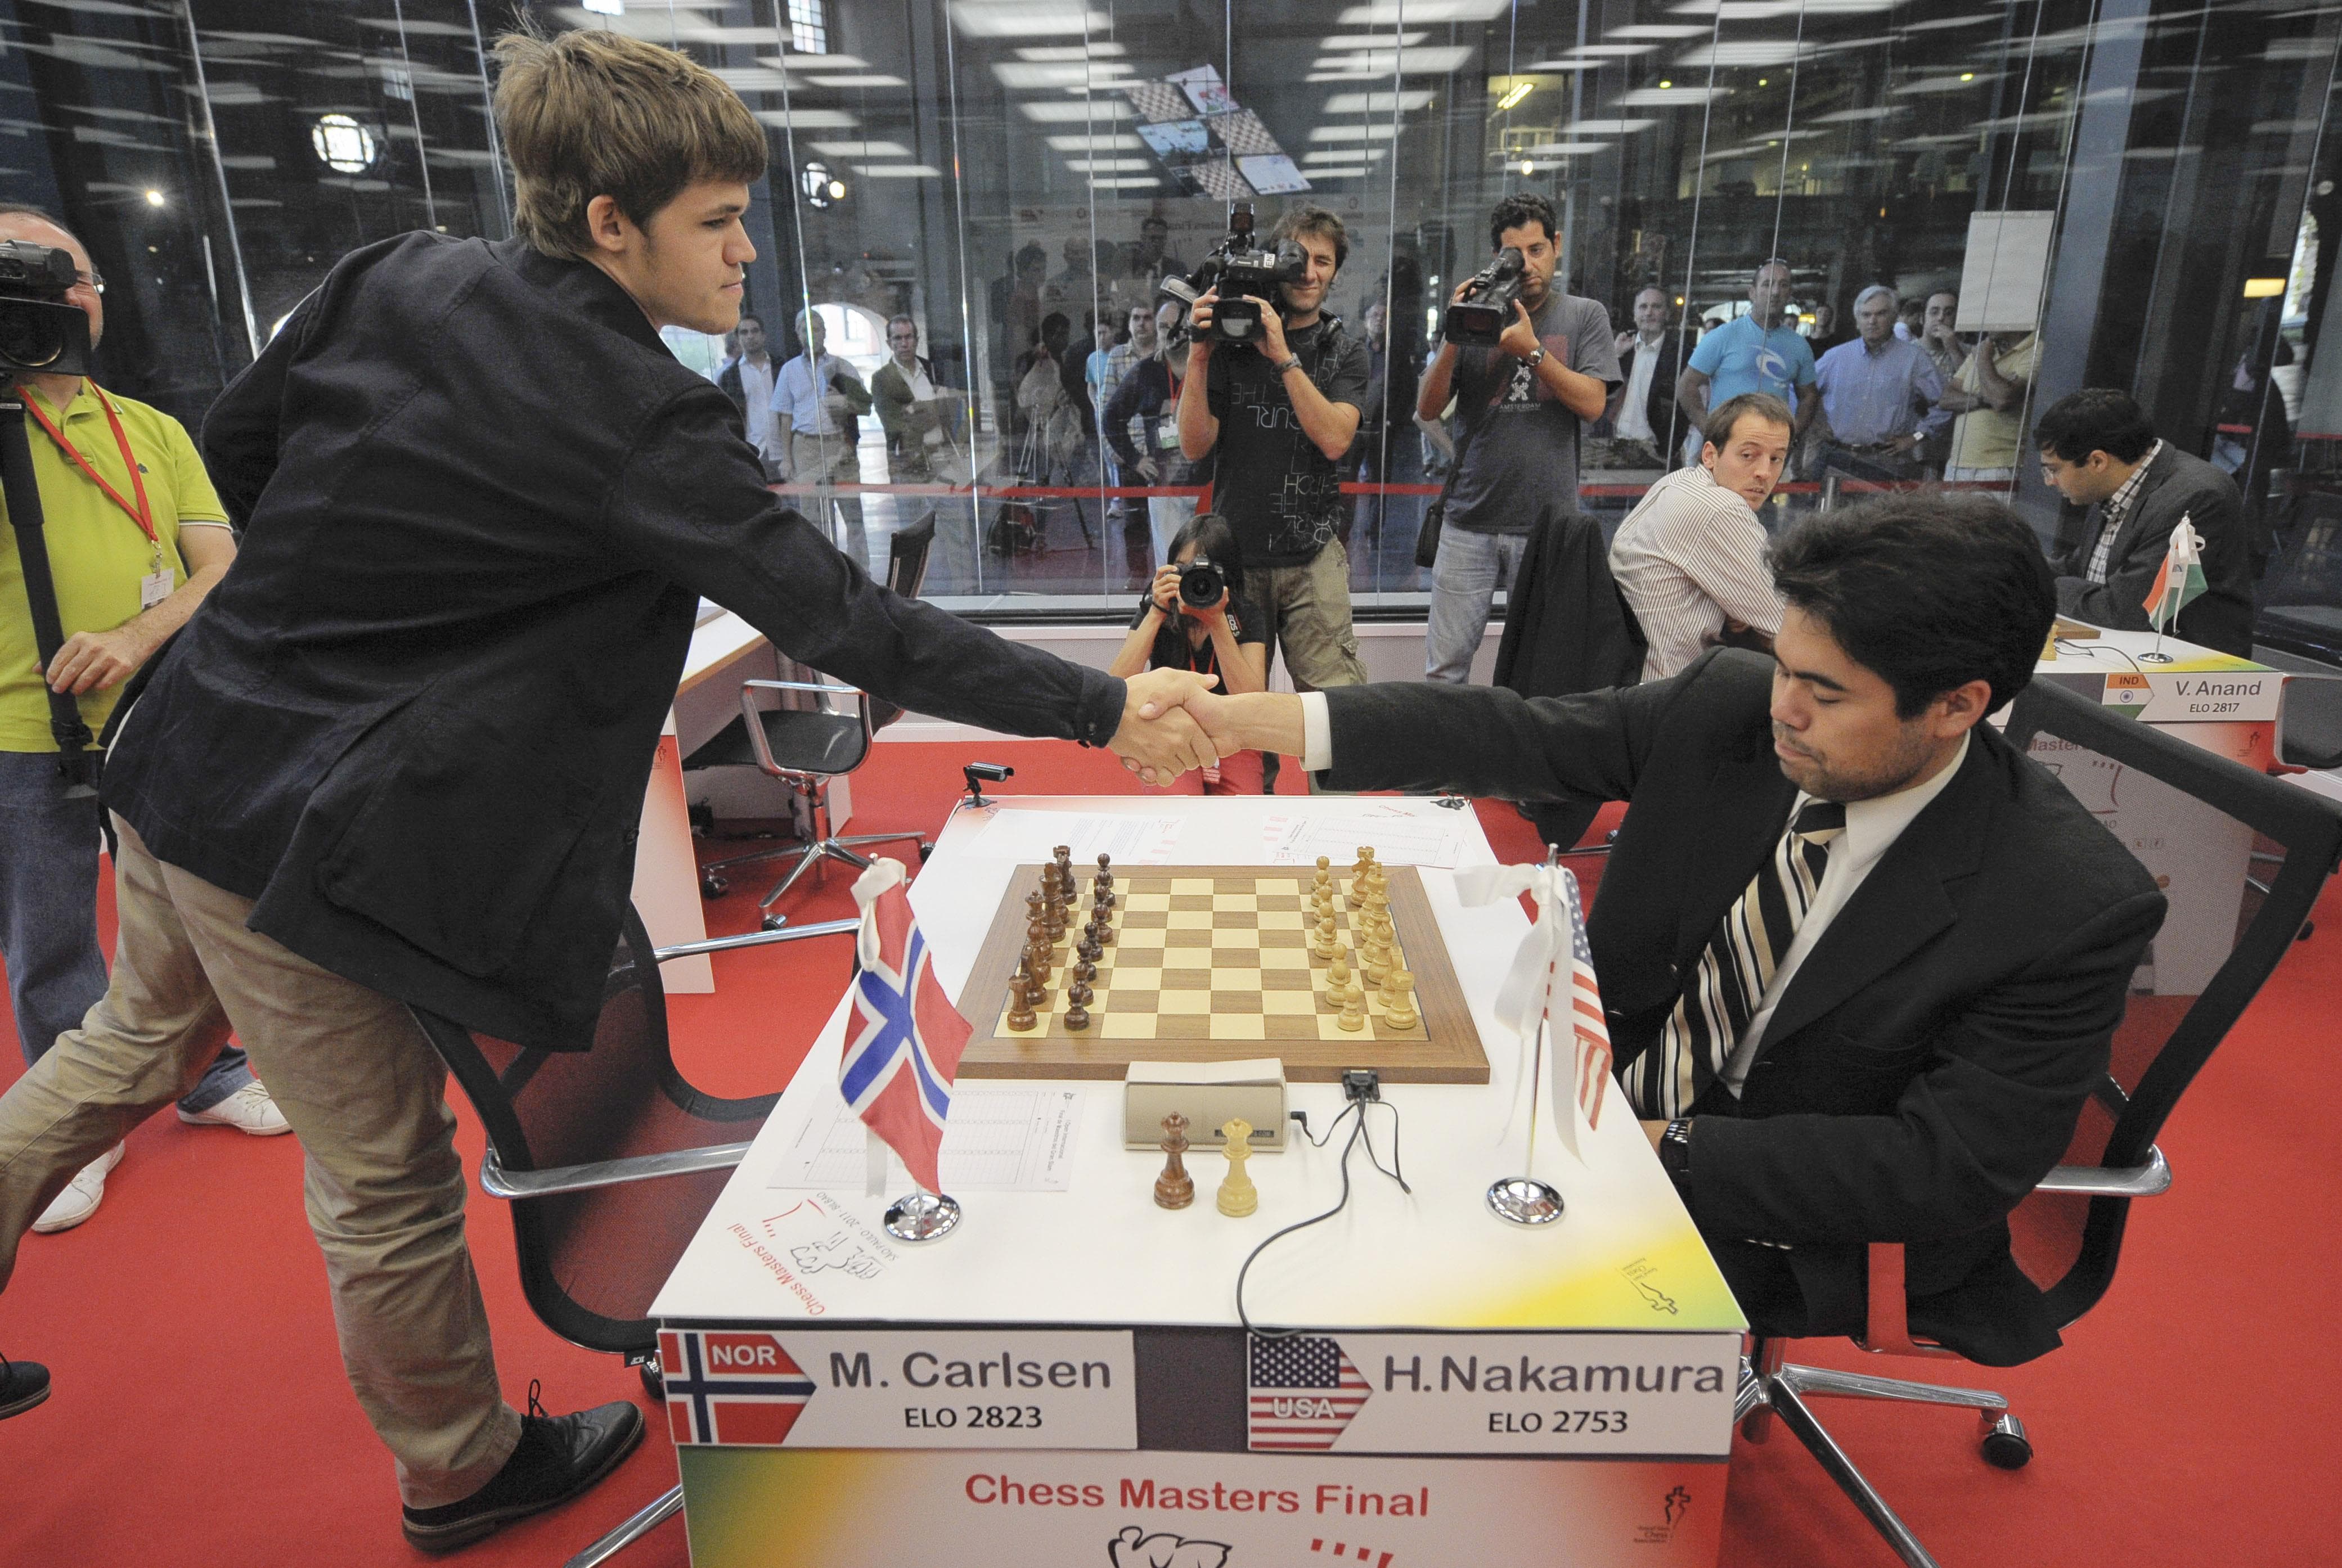 Boston-area chess players watch American compete in world